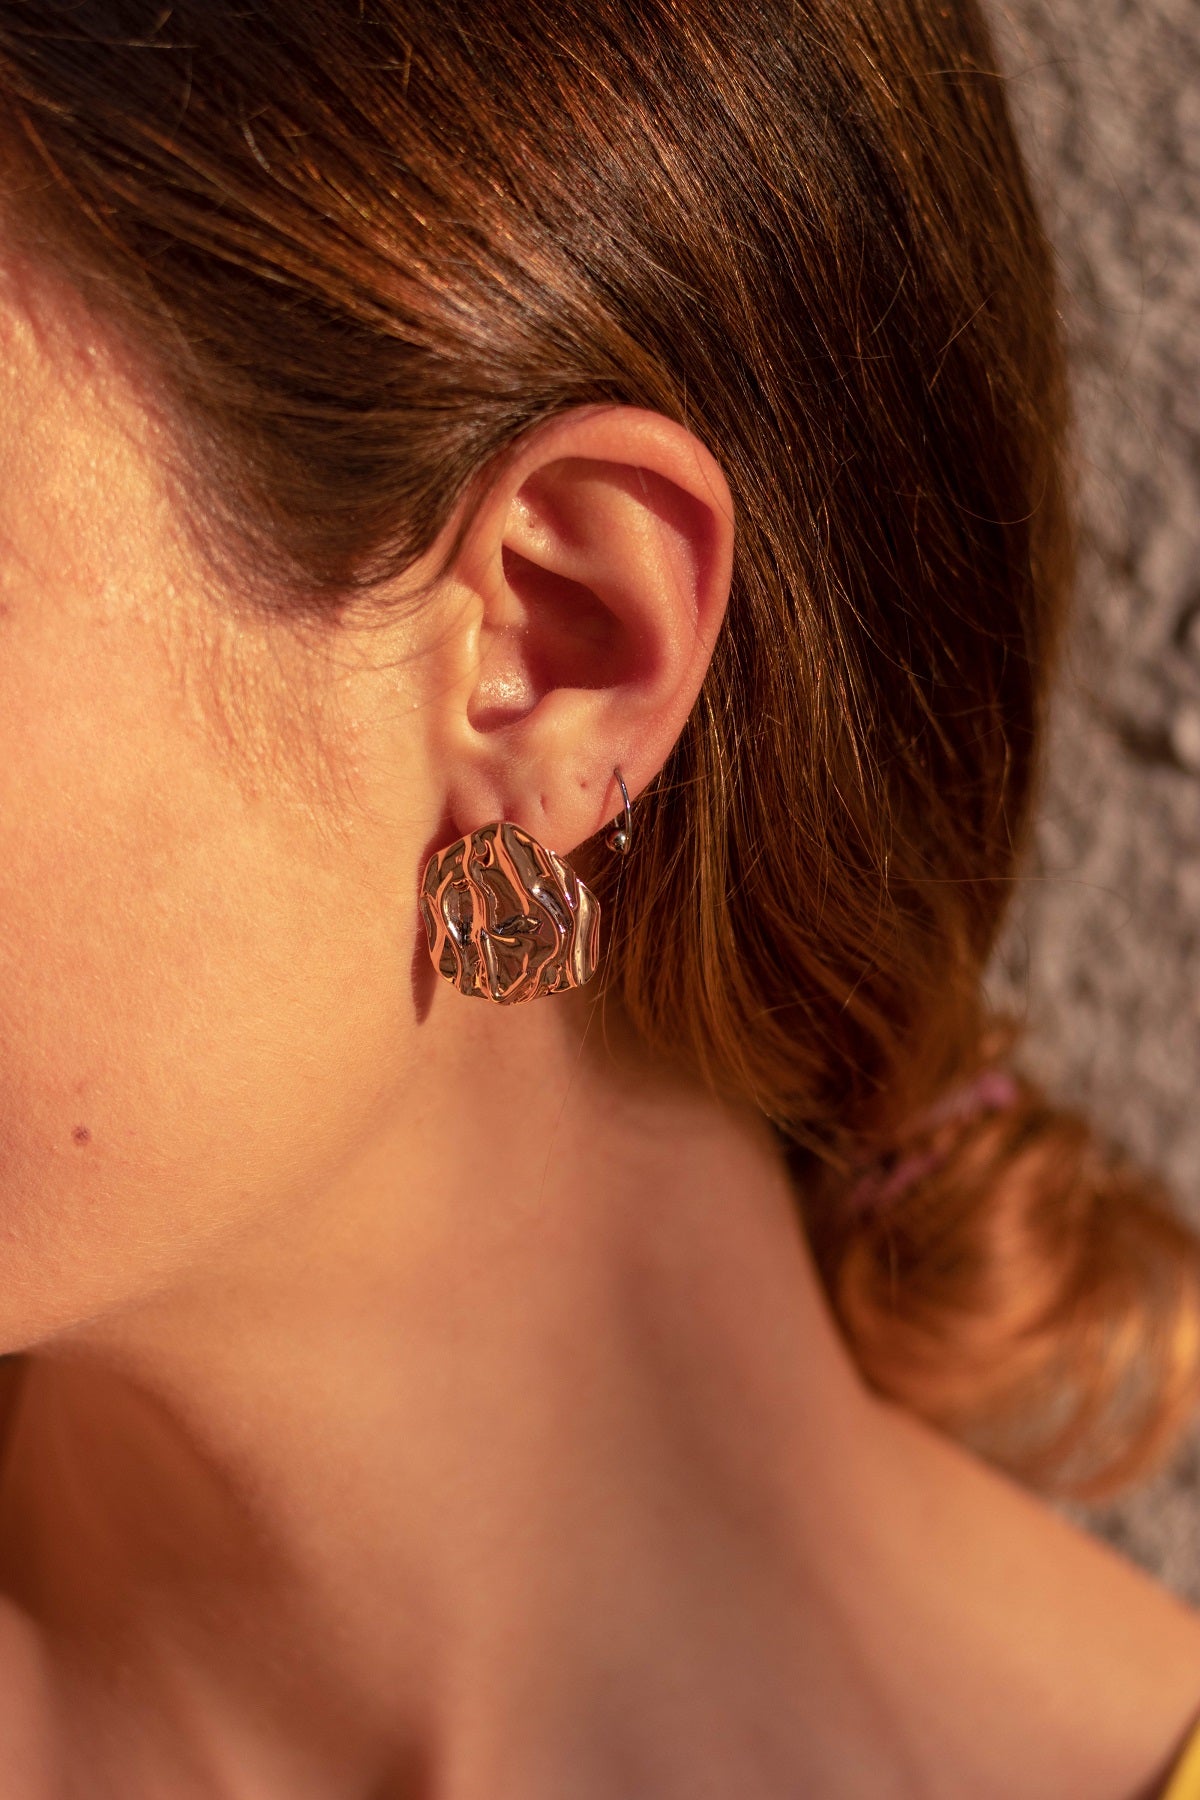 Explosion Earrings - Gold Plated Sterling Silver